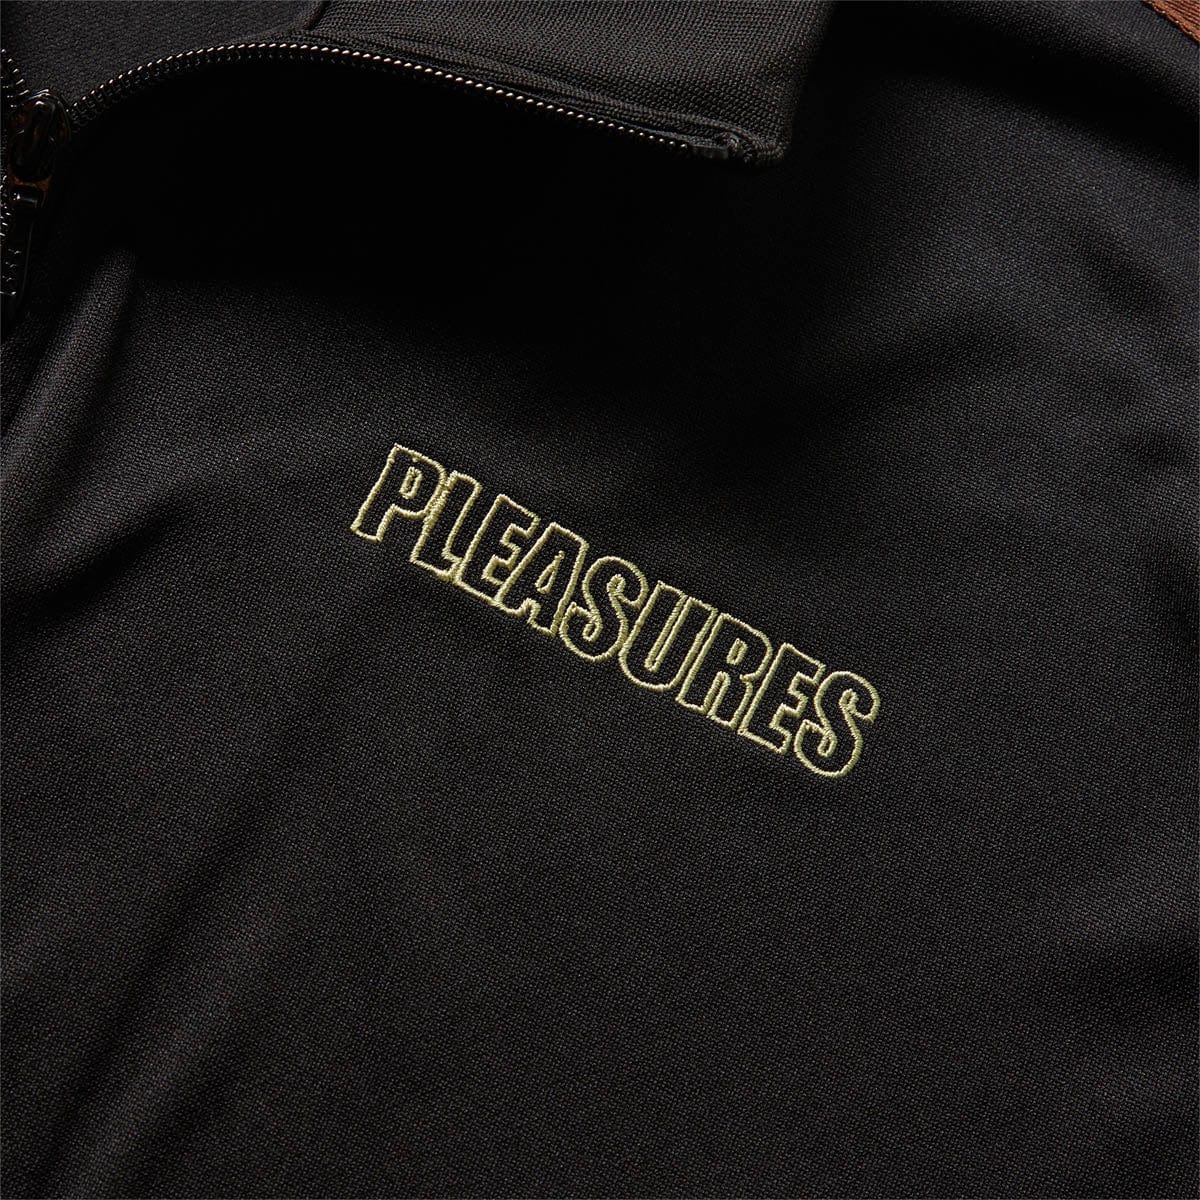 Pleasures Outerwear X PLAYBOY WICKED TRACK JACKET